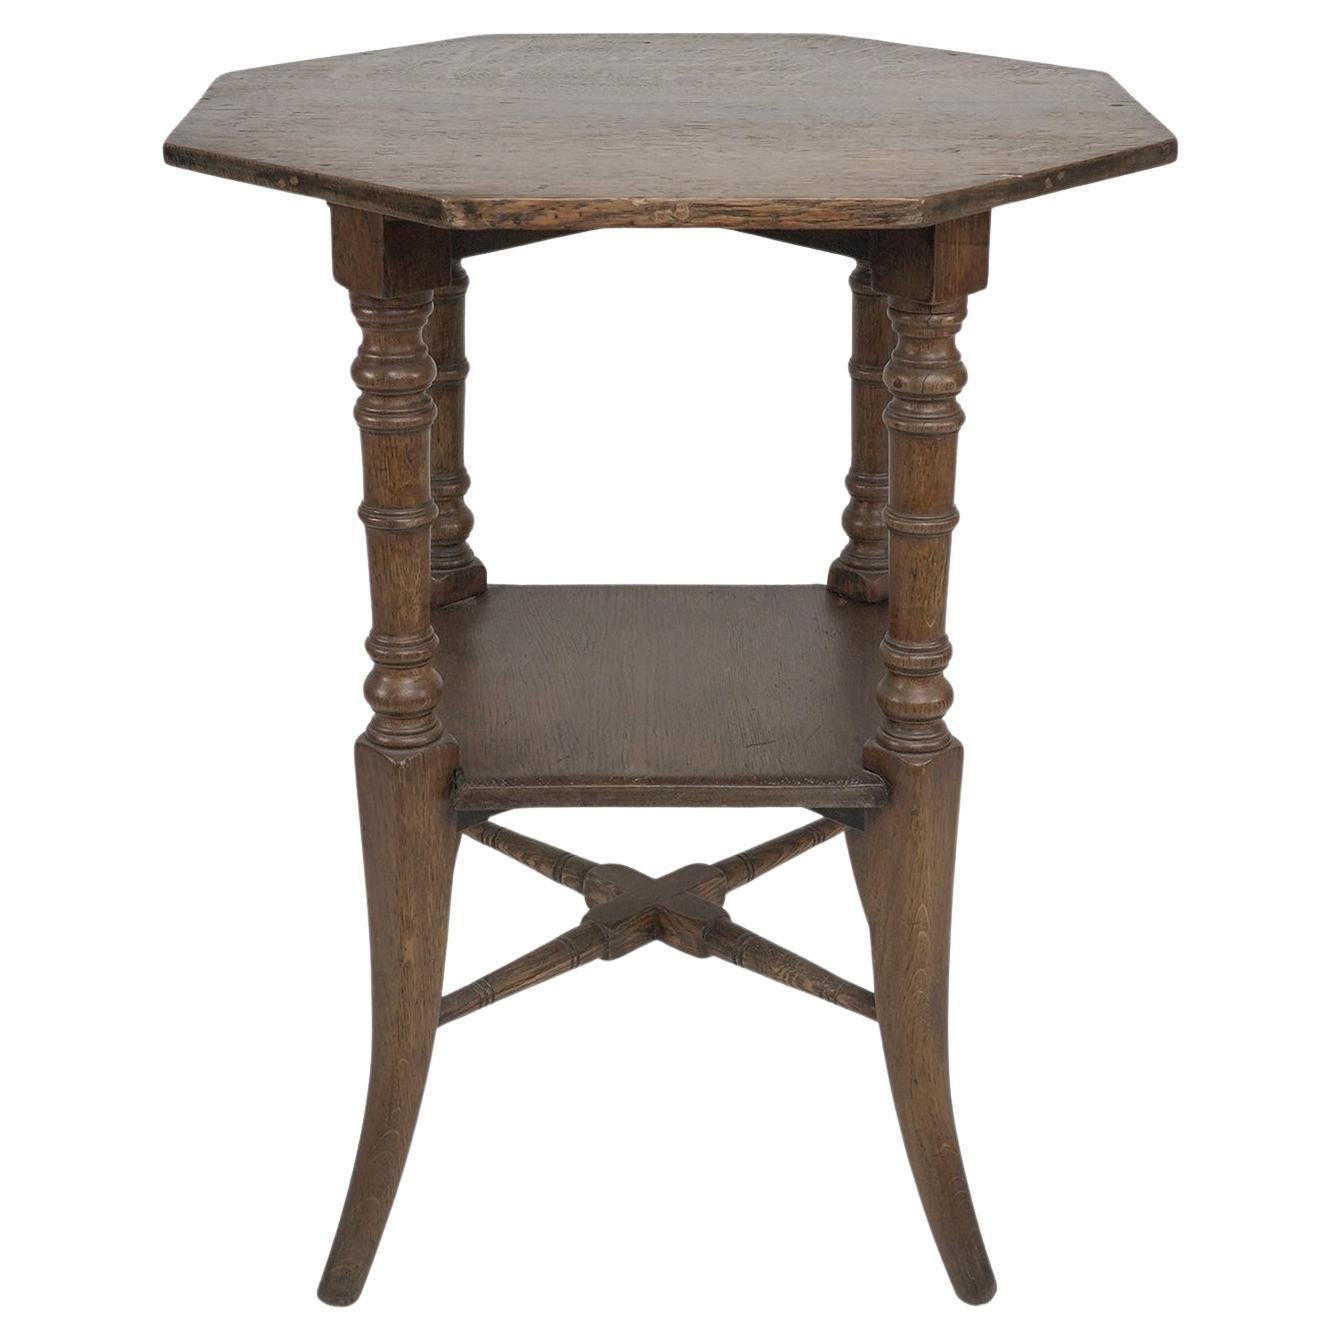 Jas Shoolbred and Co (attributed) An octagonal oak side table with central shelf For Sale